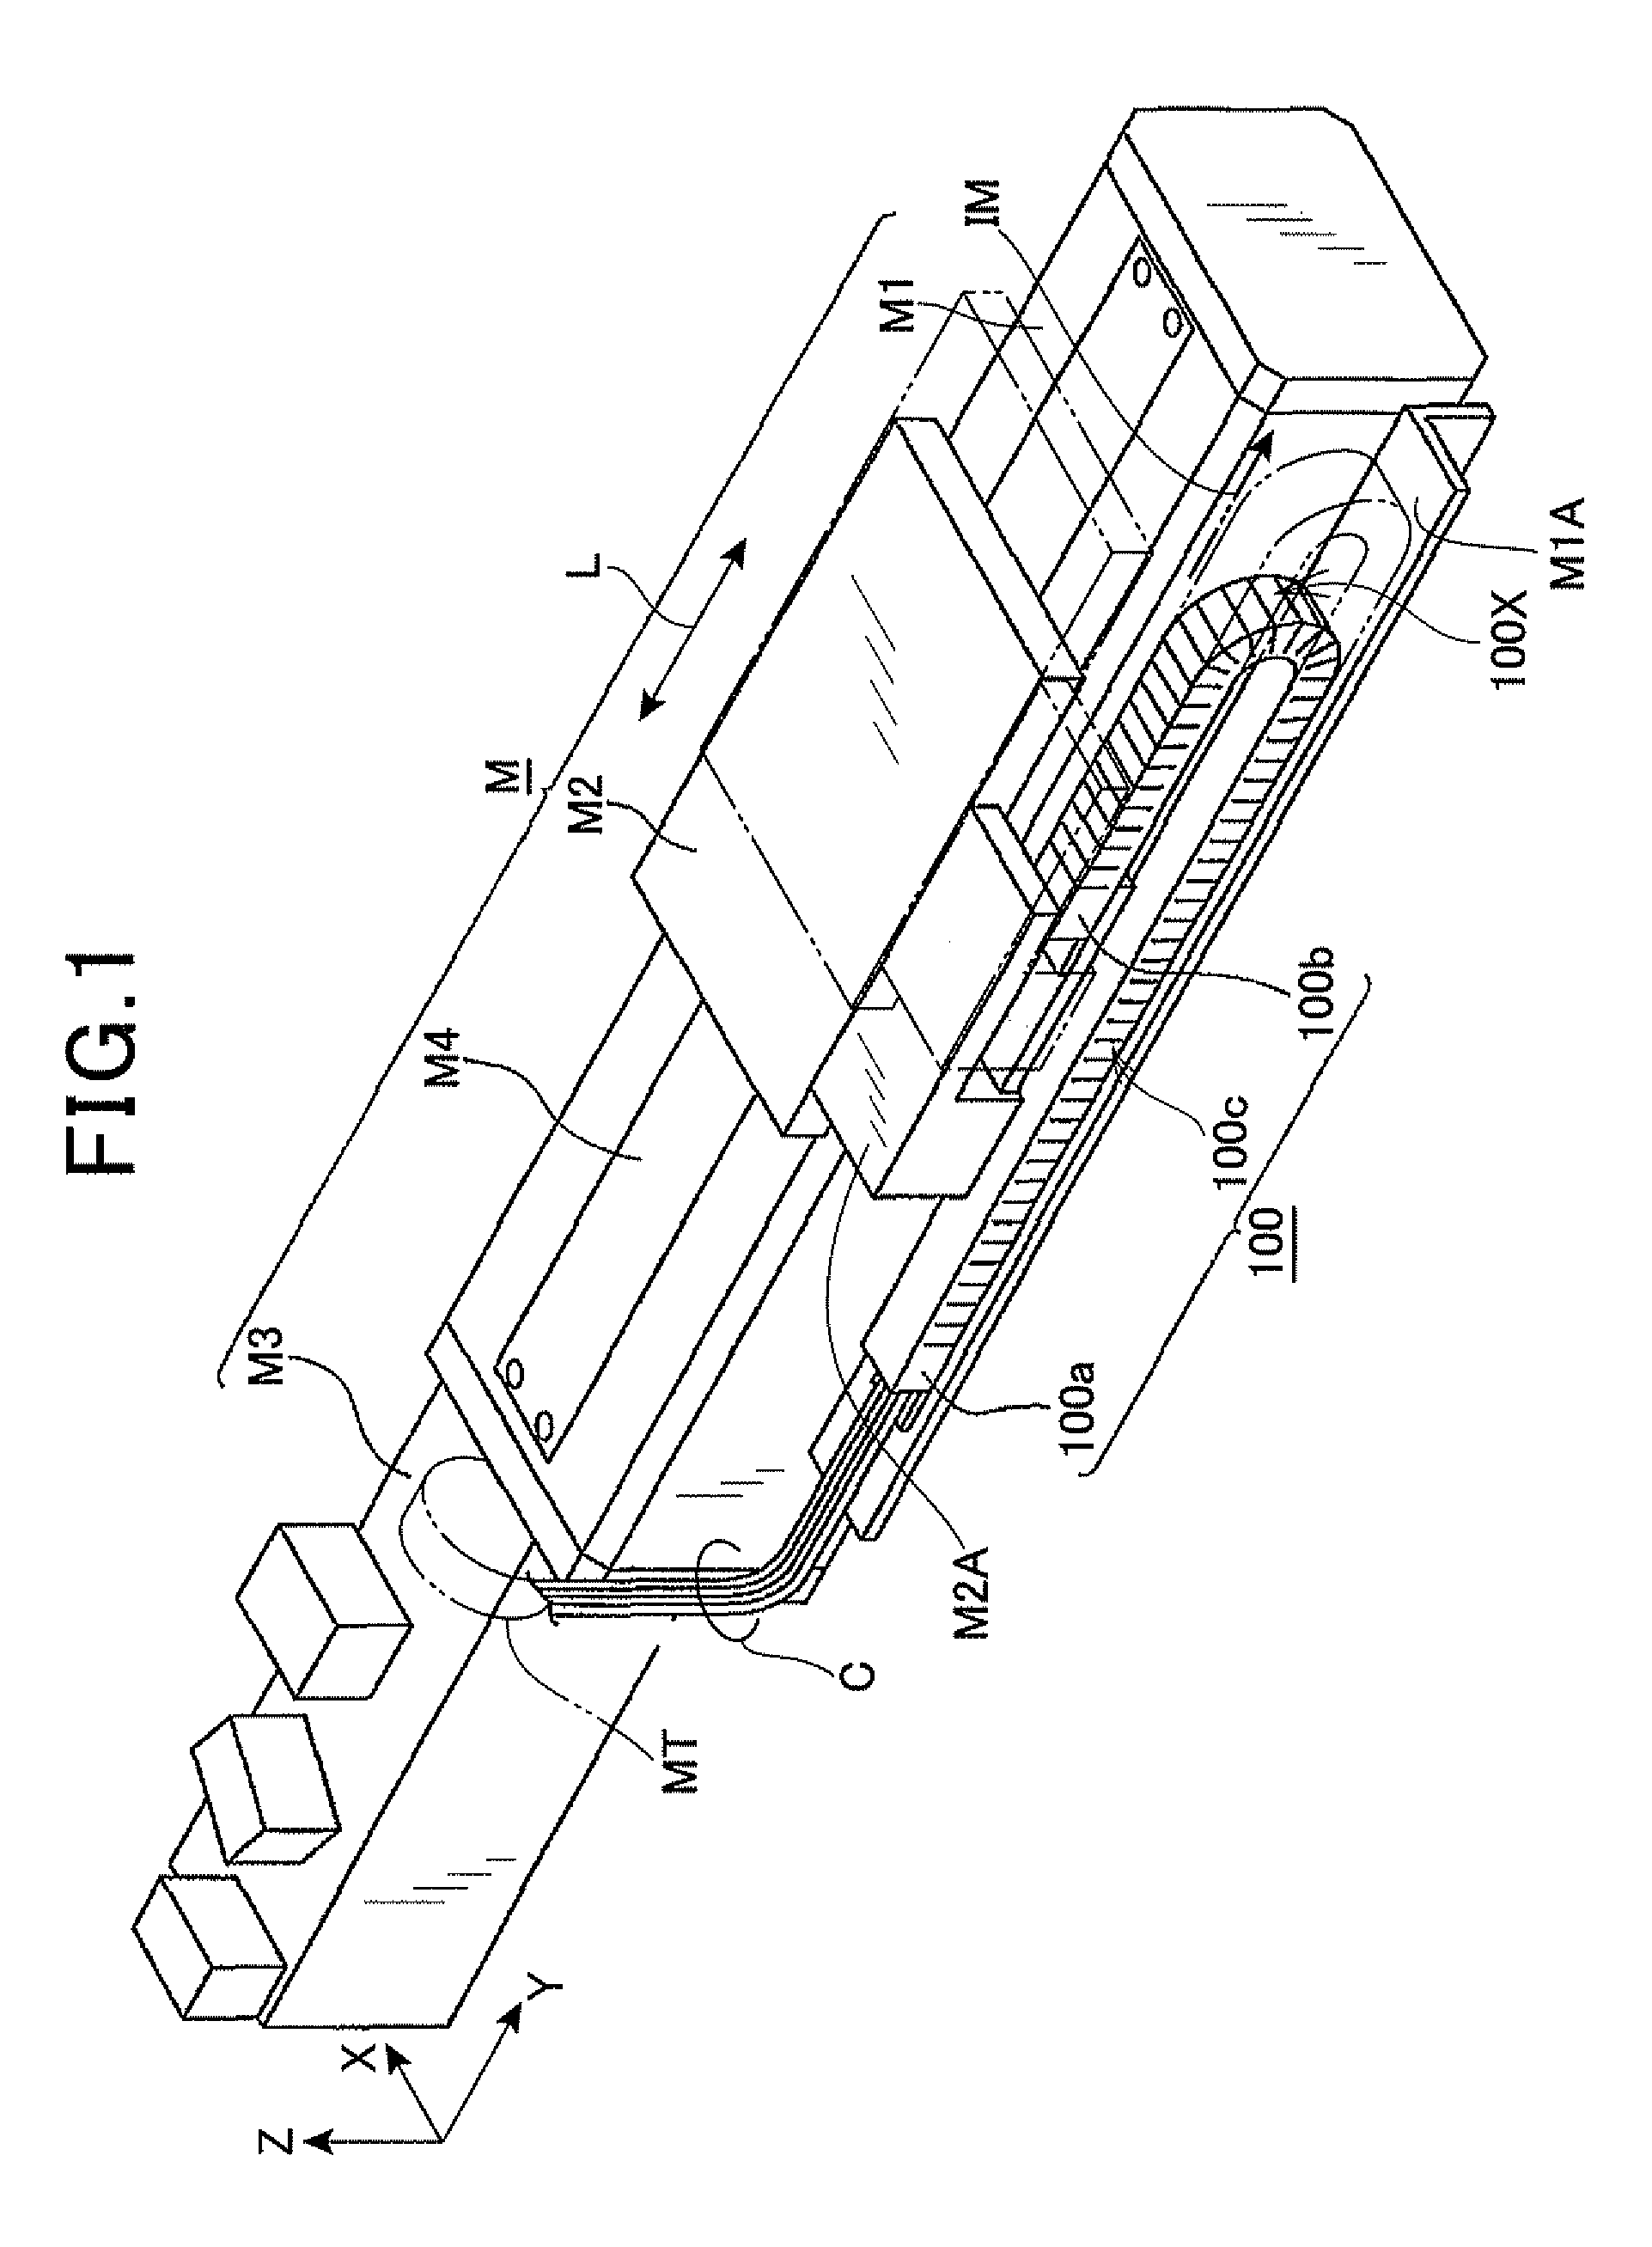 Flexible protective guide internally holding long members